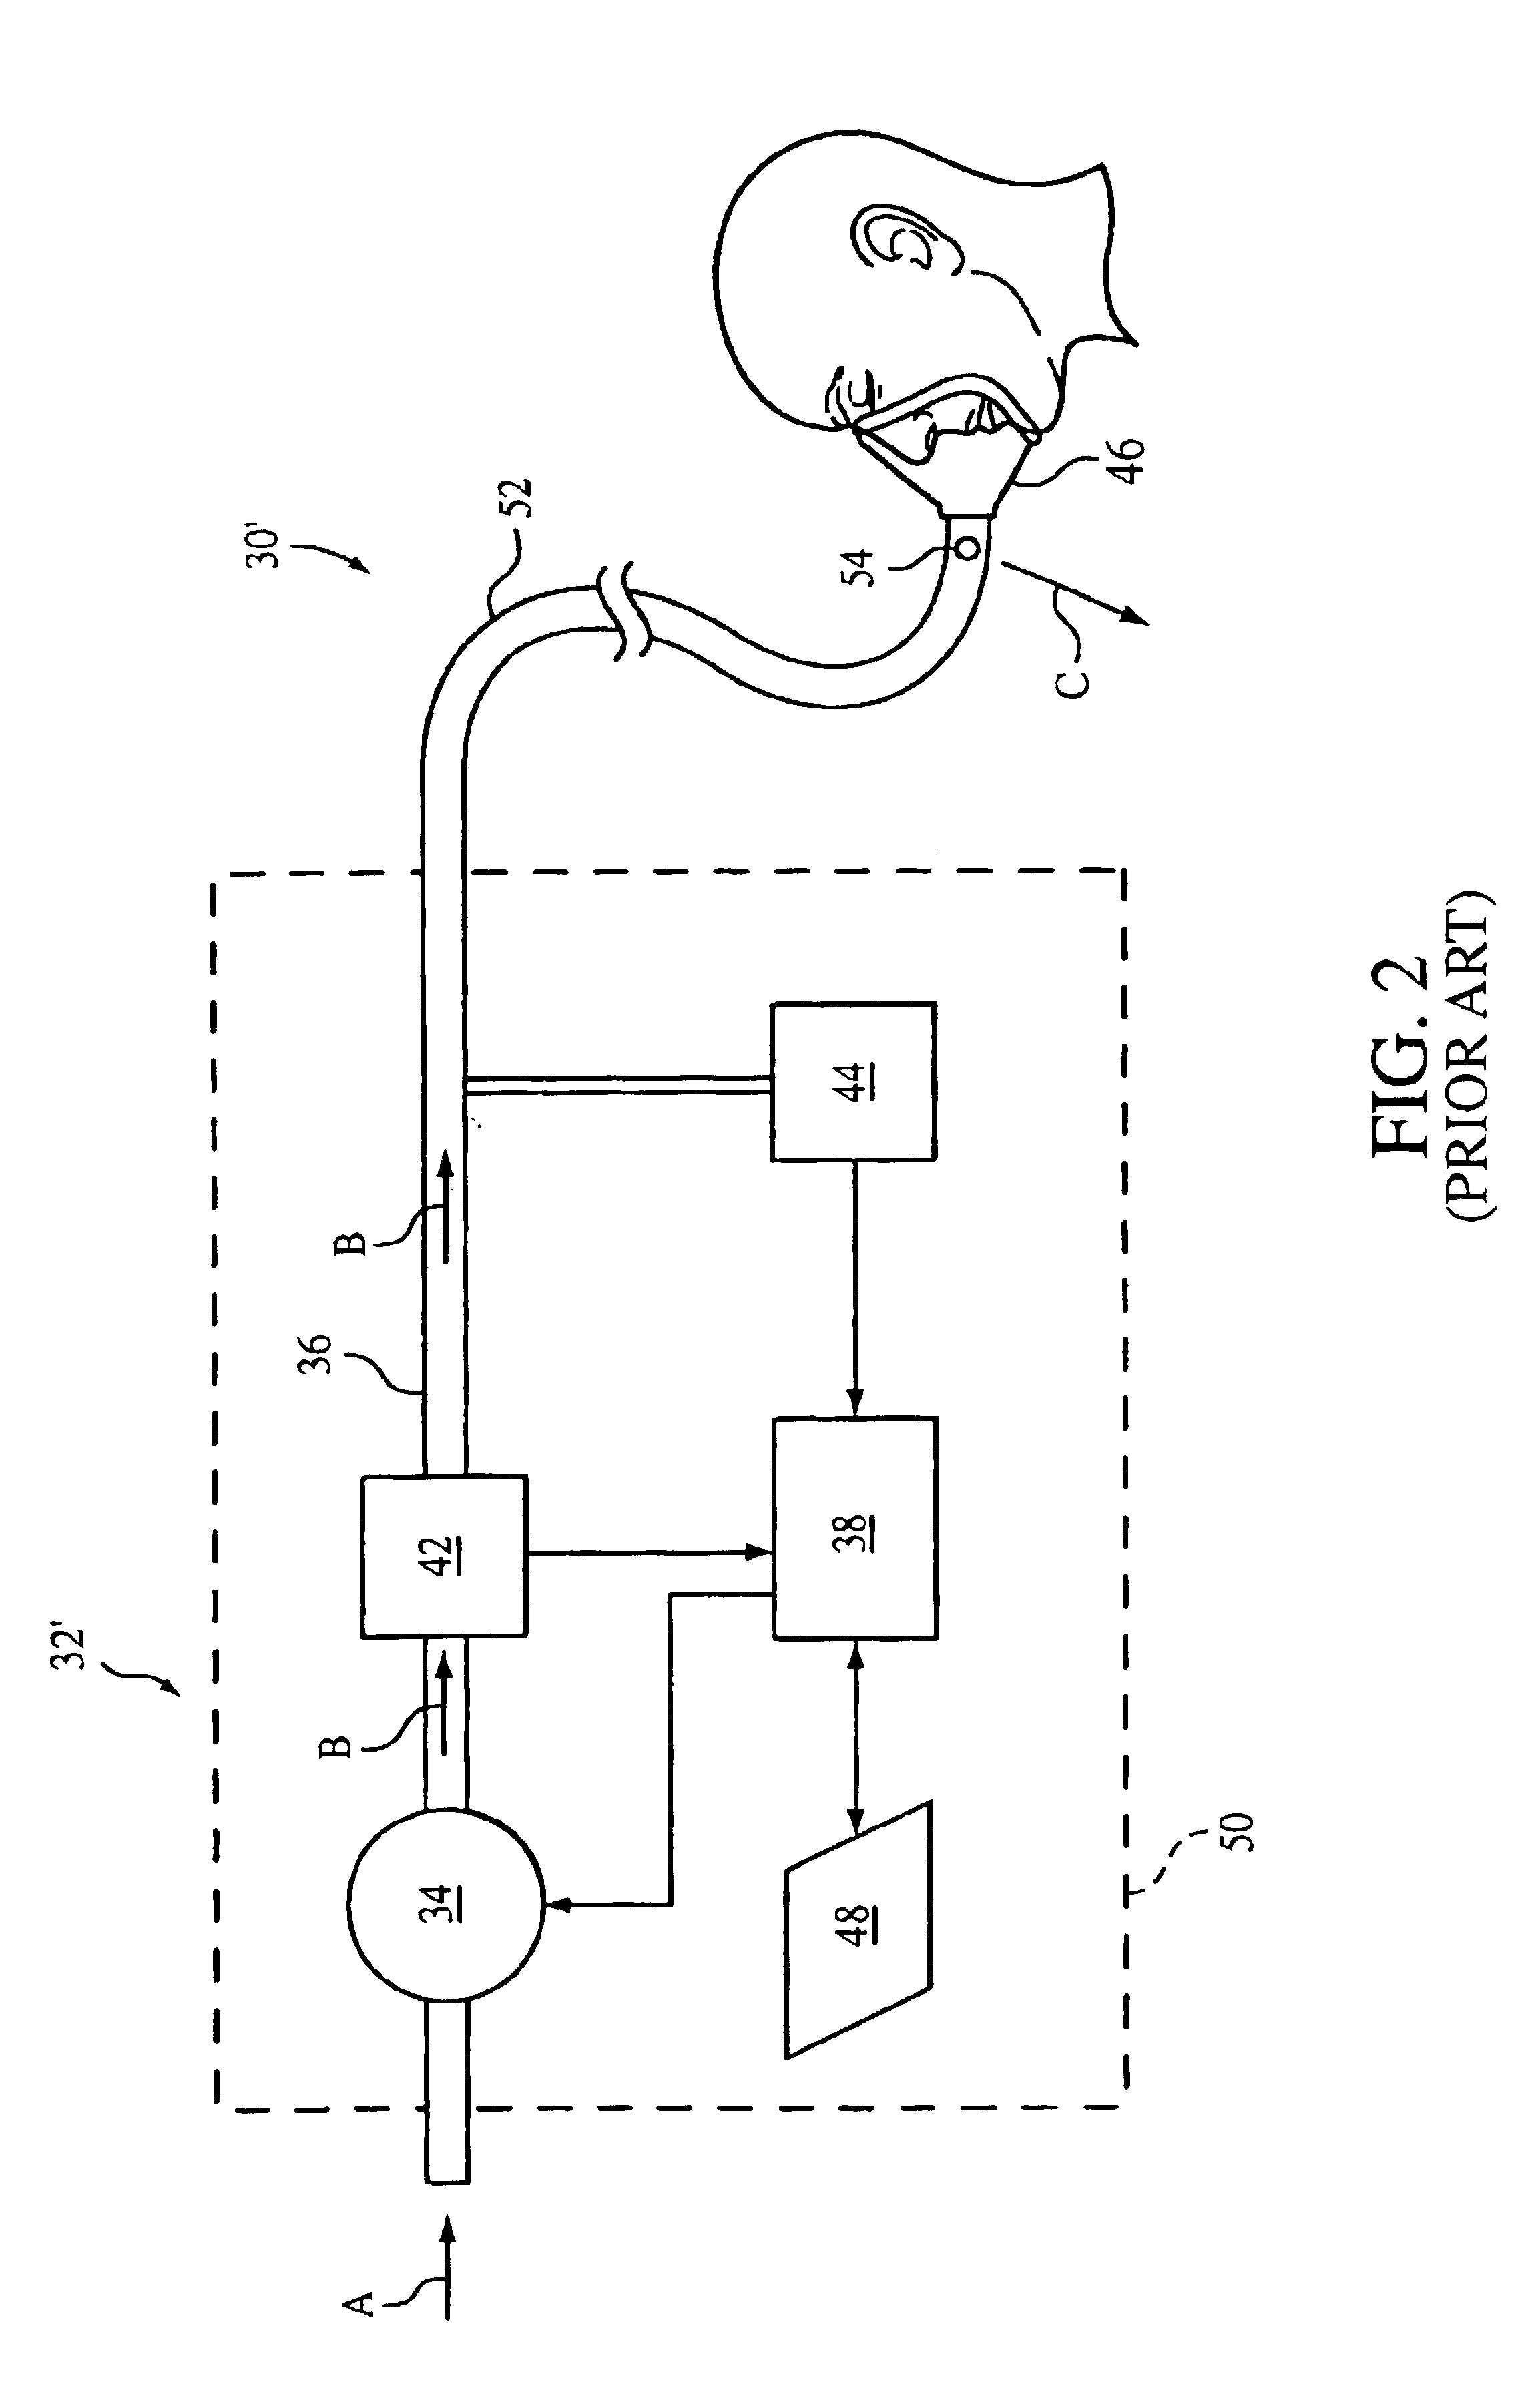 Exhaust port assembly for a pressure support system